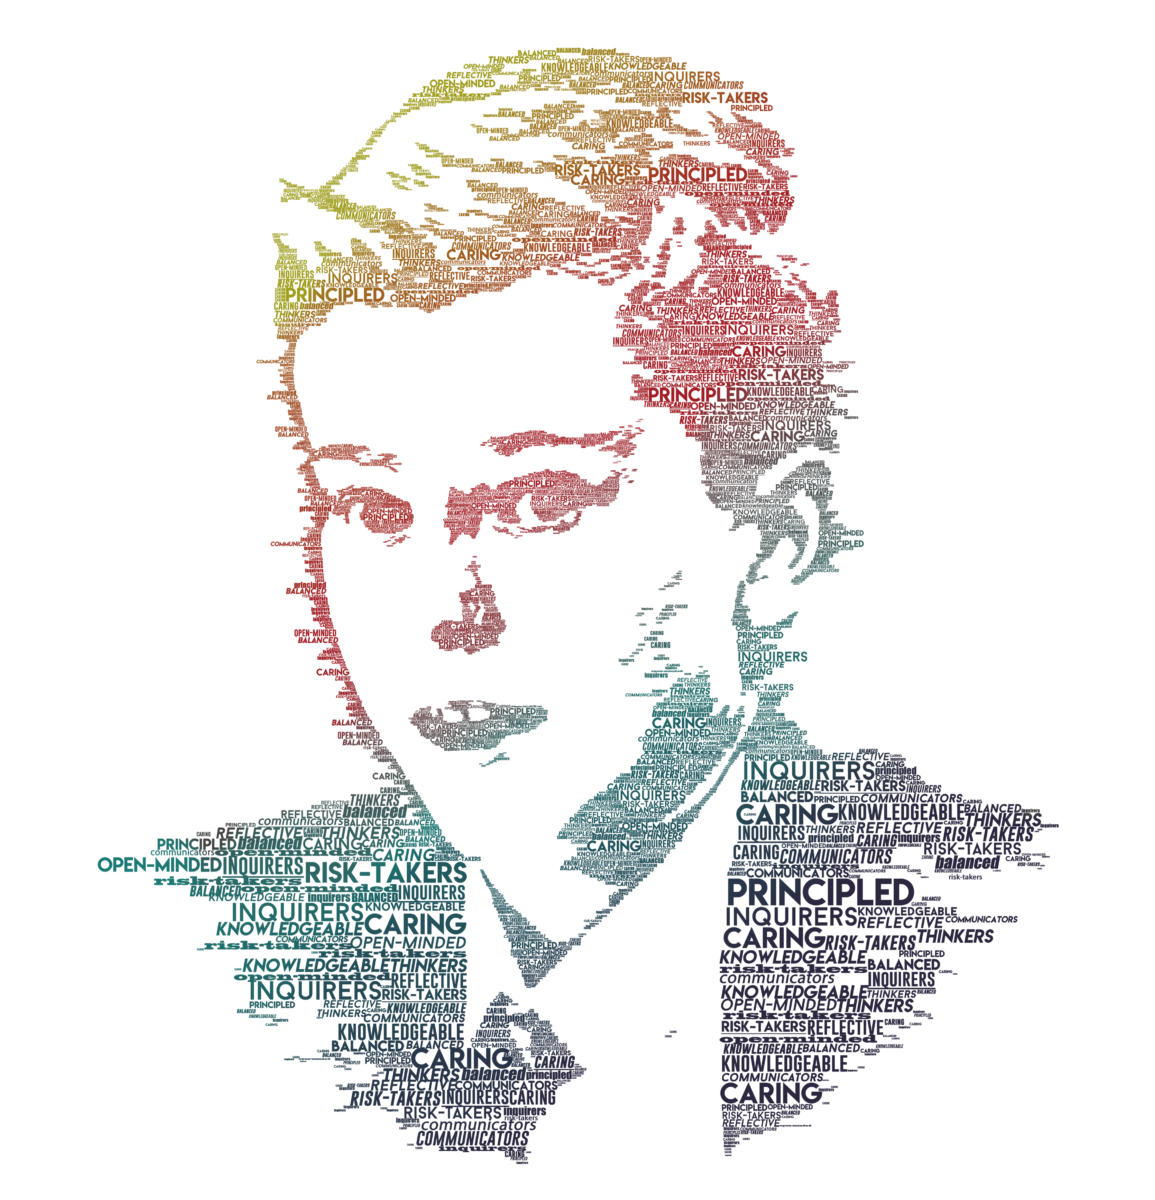 Word art image of a boy using the IIB and LAB attributes using a rainbow of colours